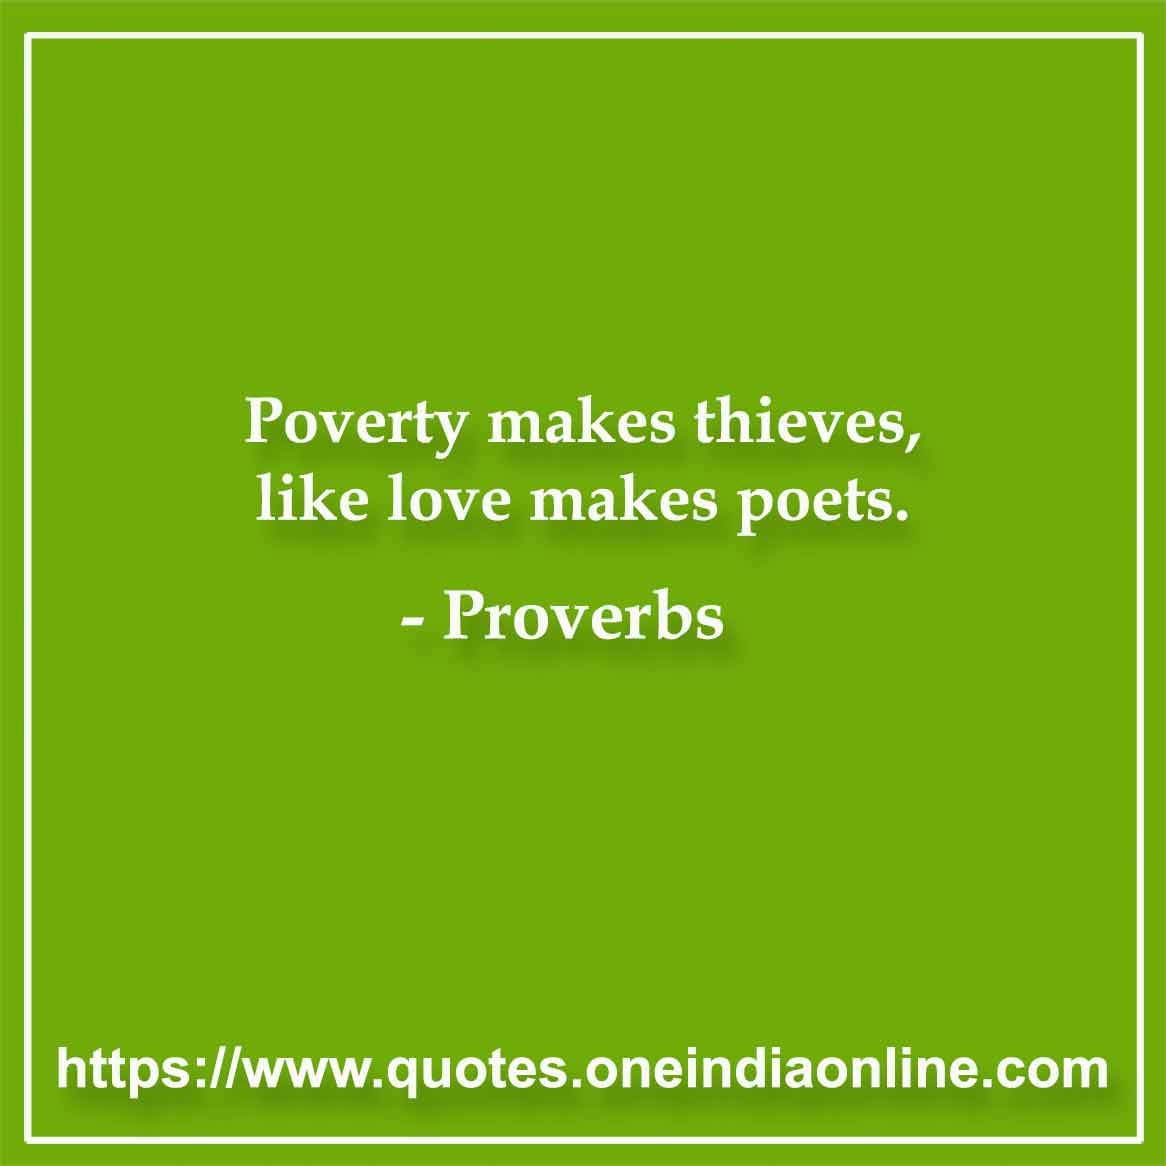 Poverty makes thieves, like love makes poets.

